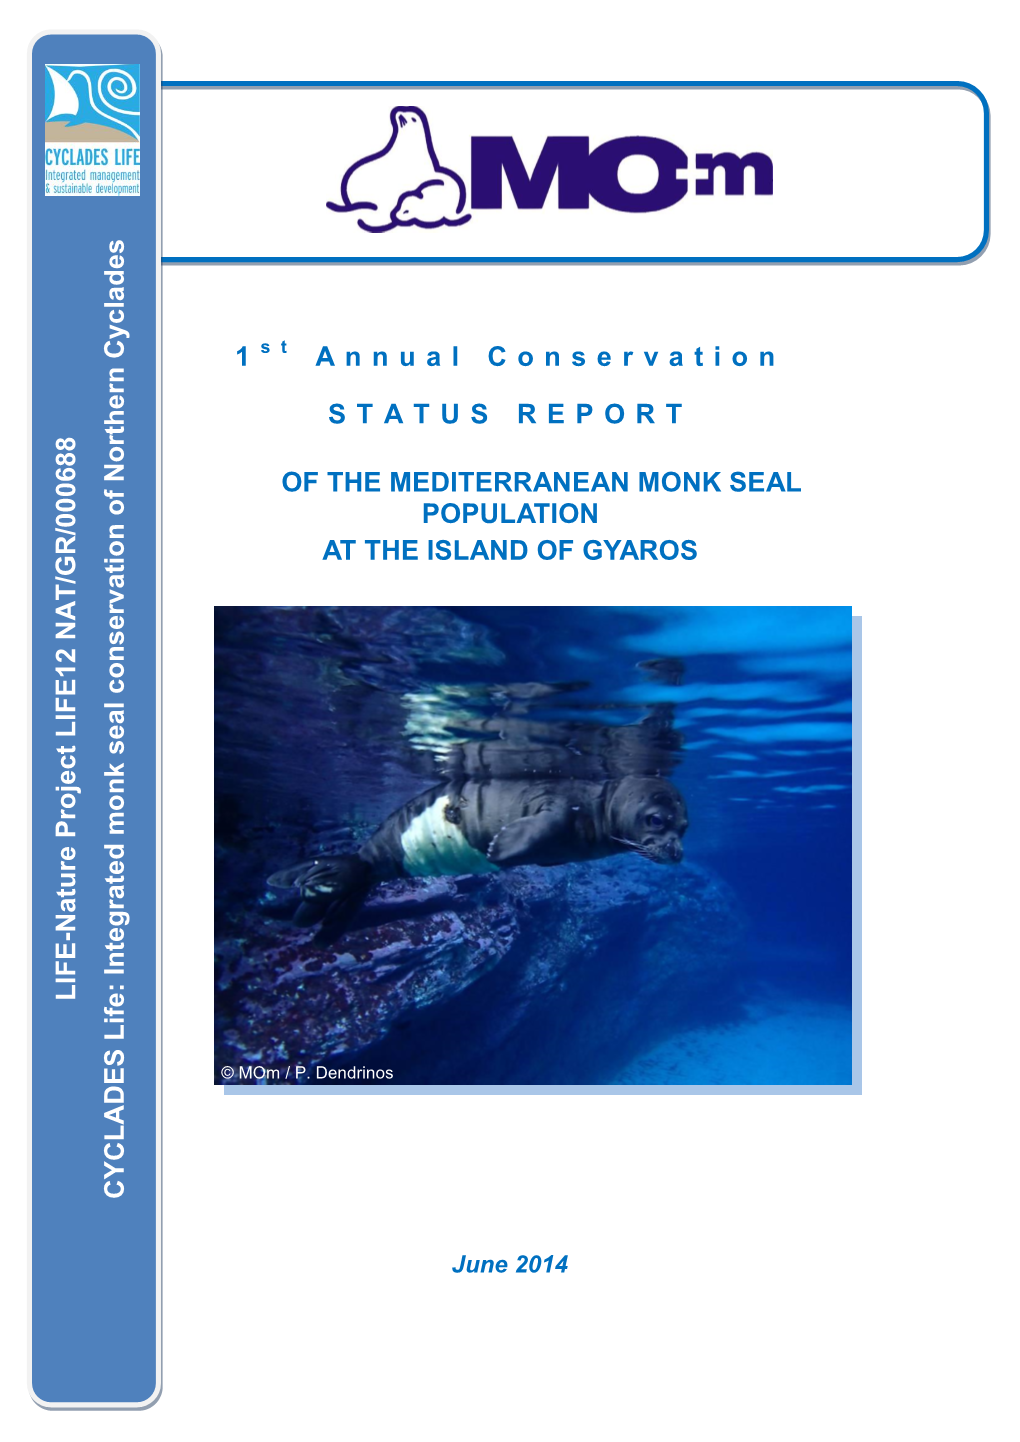 1St Annual Conservation Status Report of the Mediterranean Monk Seal Population at the Island of Gyaros Page 2